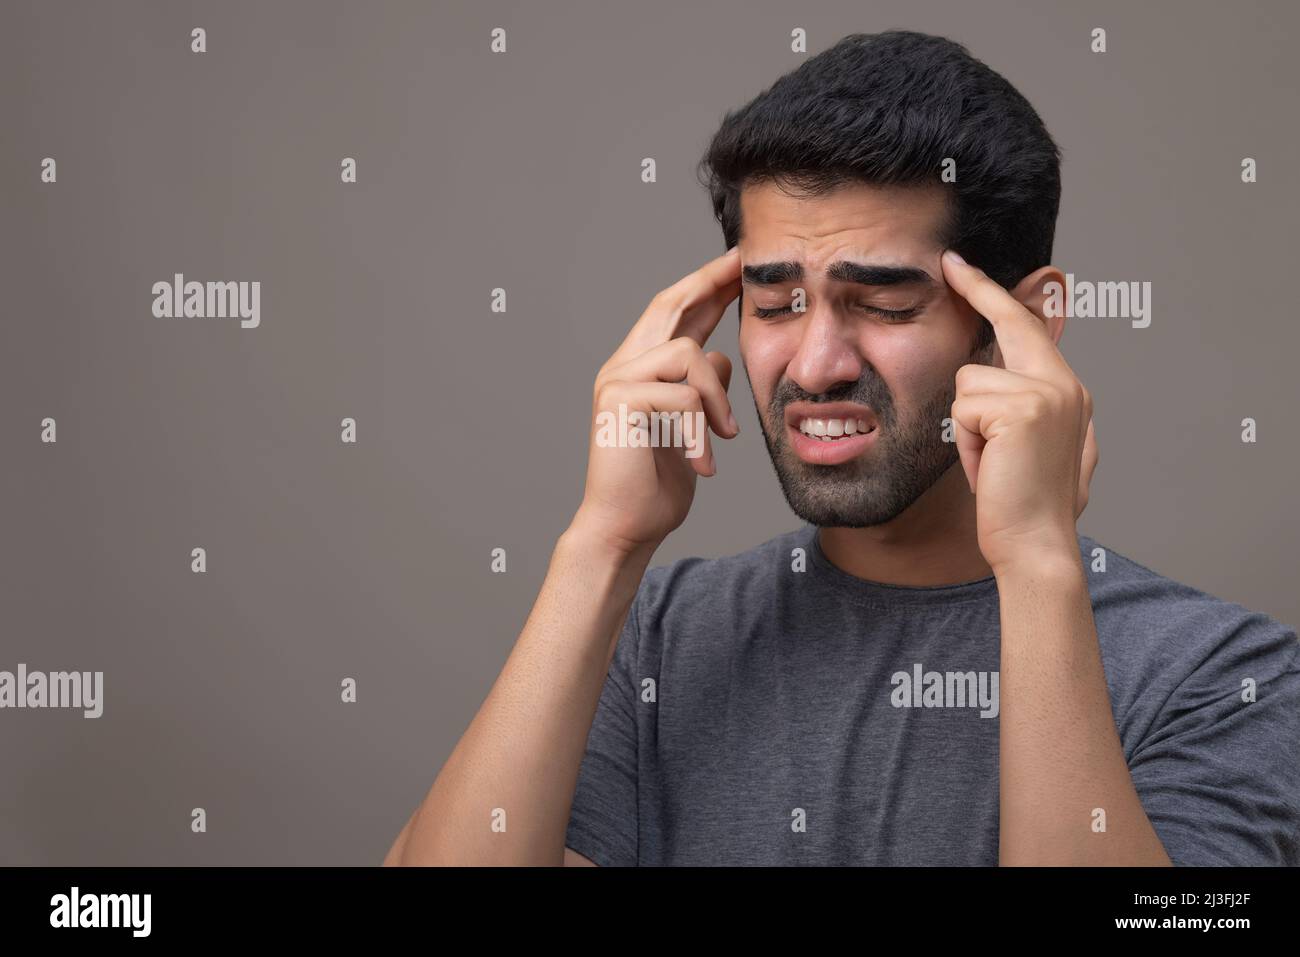 Portrait of a young man suffering from headache with hands on forehead Stock Photo